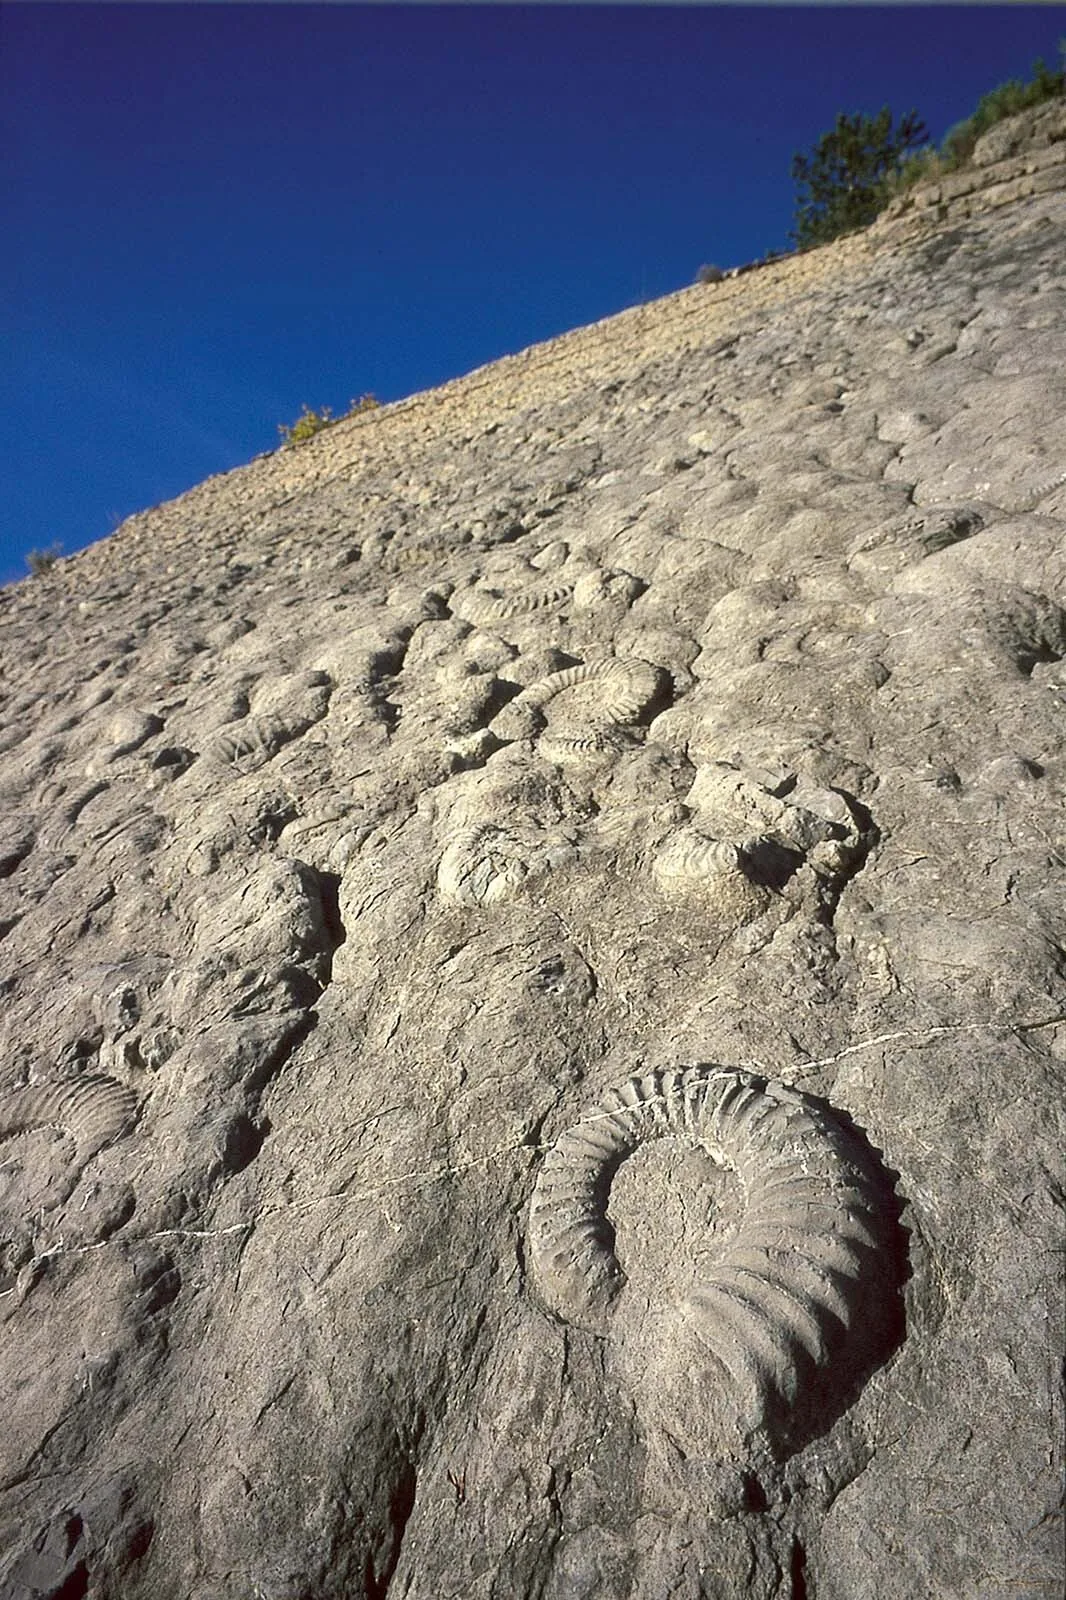 General view of the ammonite slab at Digne les Bains